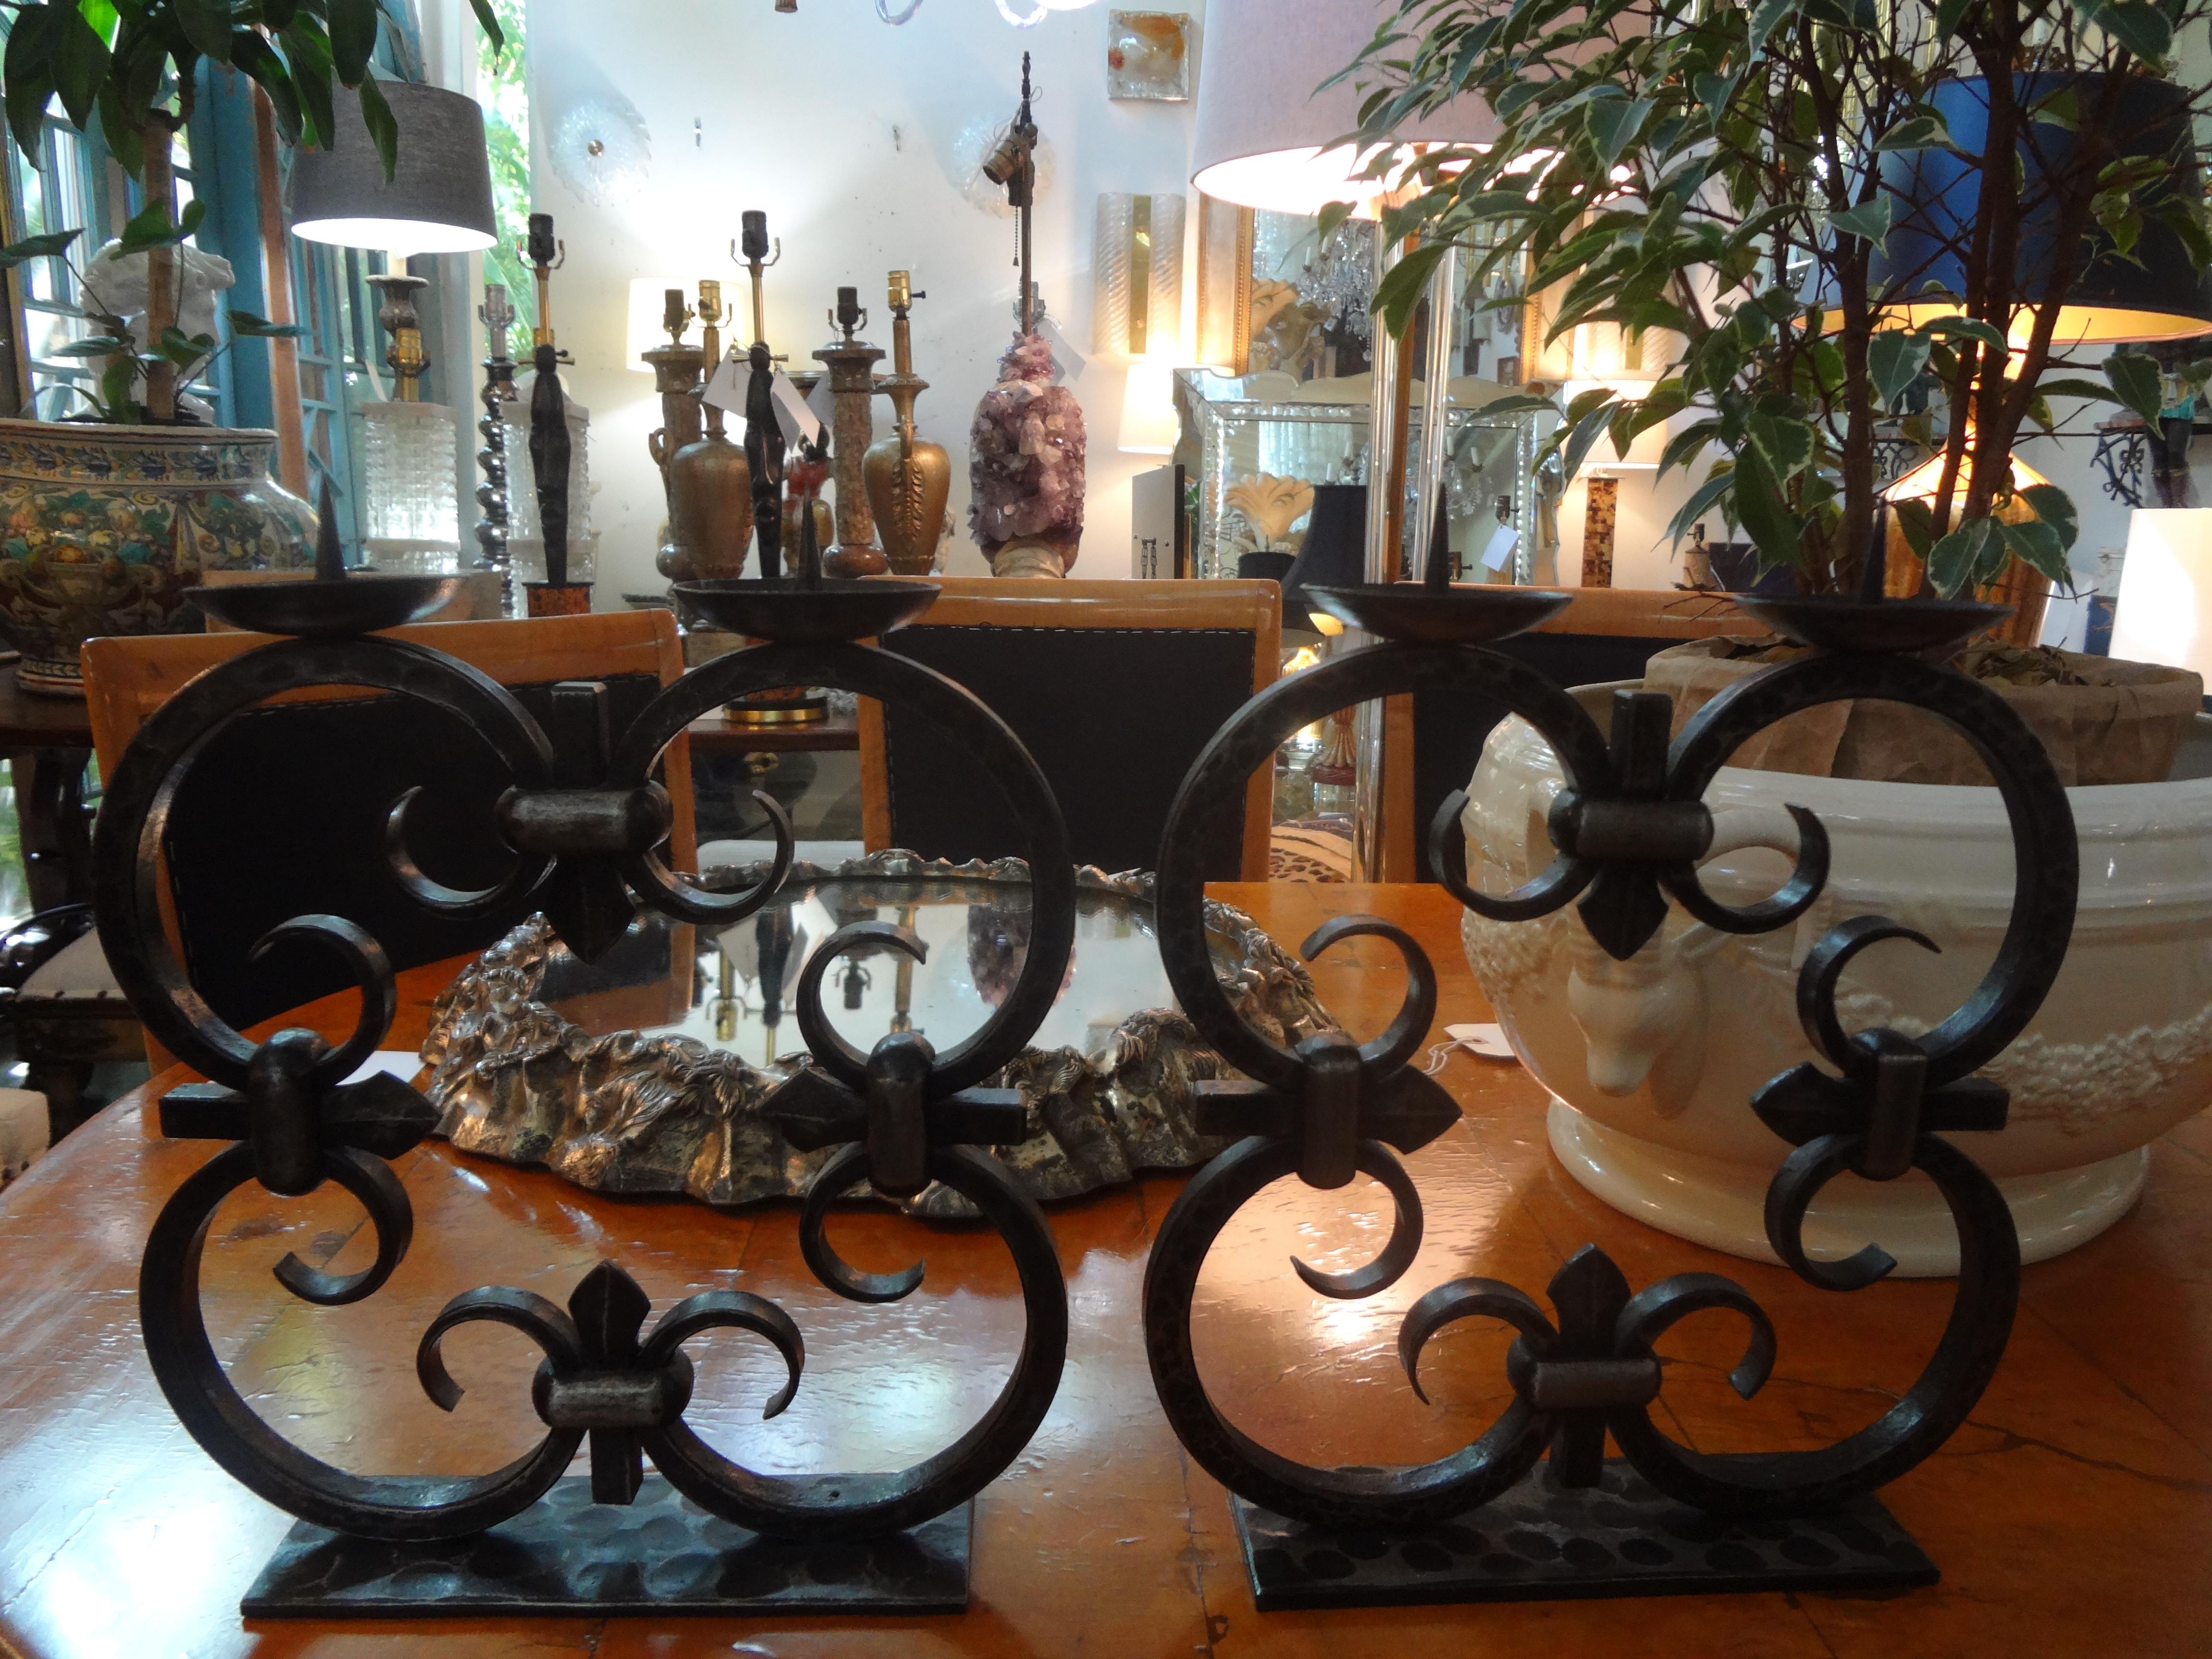 Beautiful rare large pair of French Art Deco hand forged wrought iron candelabra, candlesticks or candleholders by Michel Zadounaïsky. These candleholders are stamped with the maker's mark.

Michel Zadounaïsky (1903-1983) was Russian born and